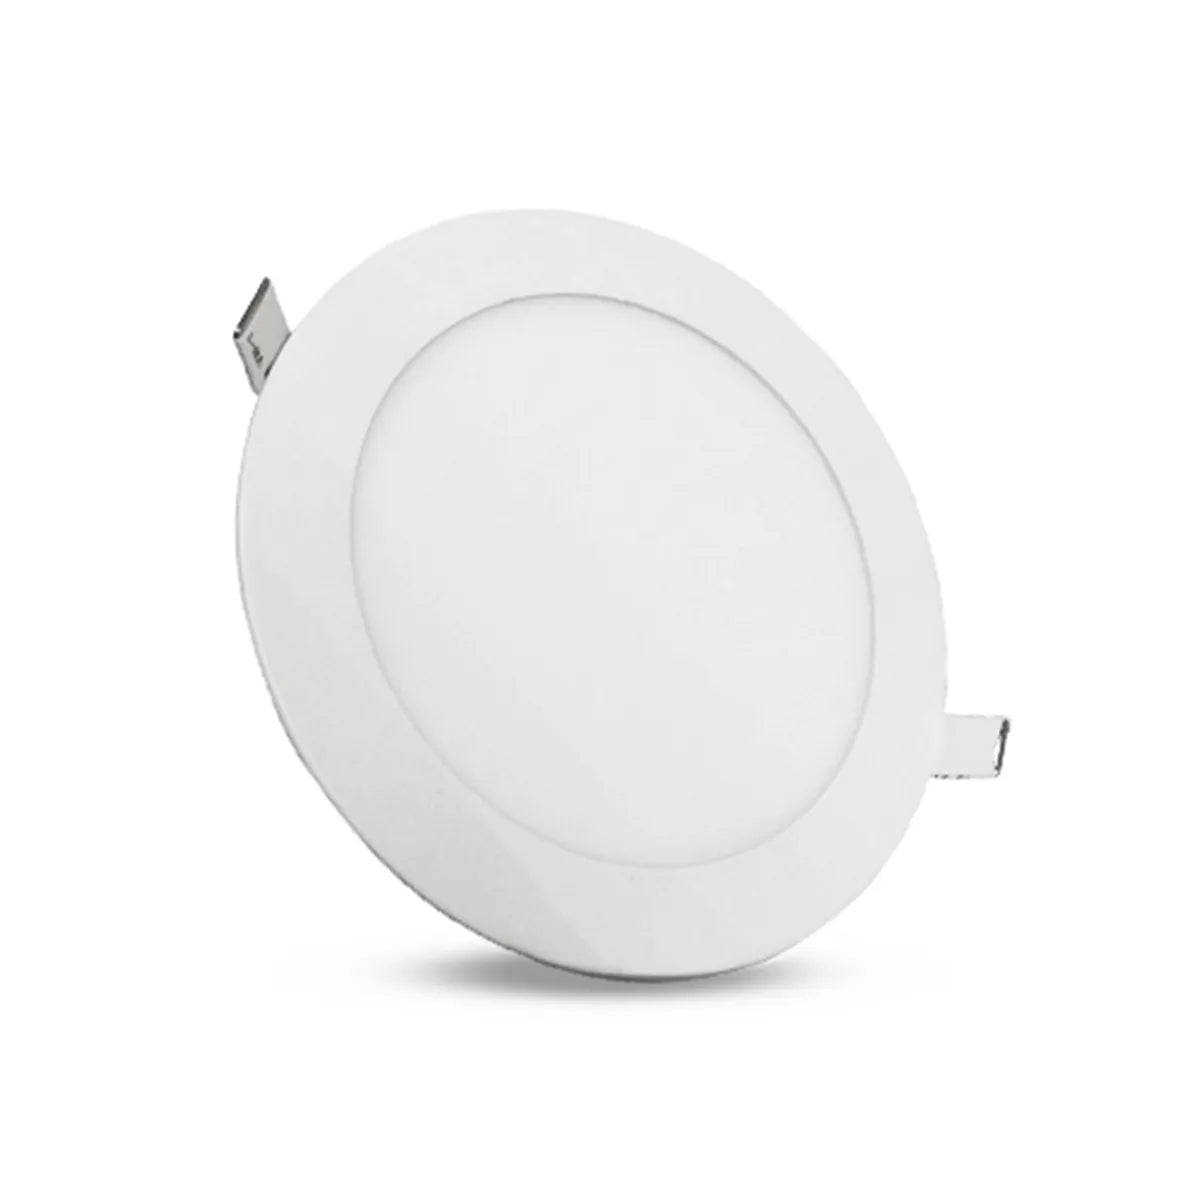 Downlight LED ⌀225mm 18W extra fin